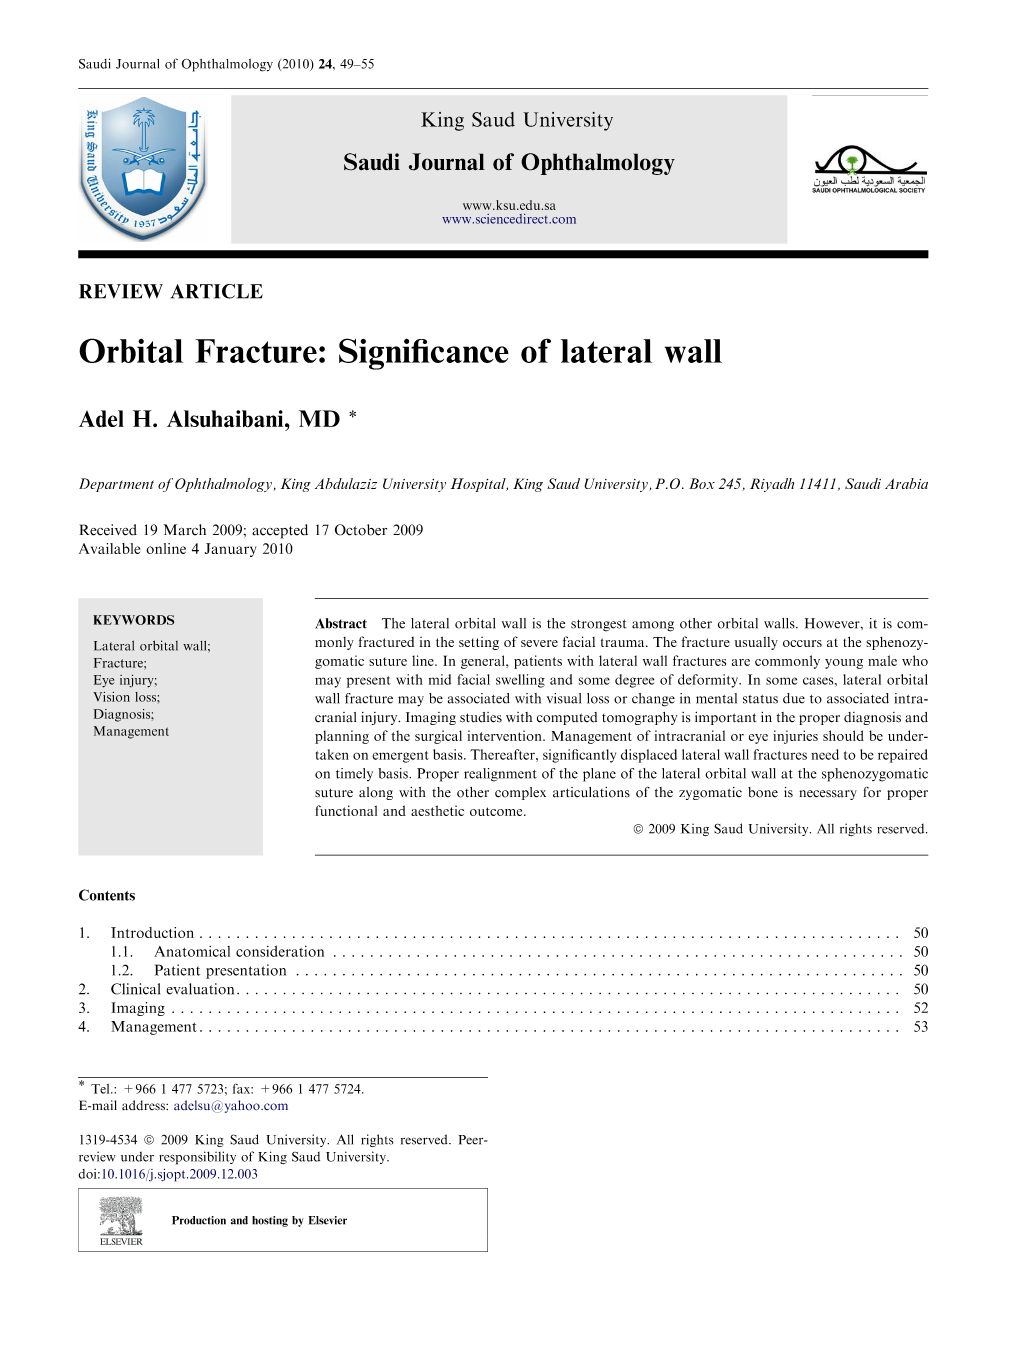 Orbital Fracture: Signiﬁcance of Lateral Wall